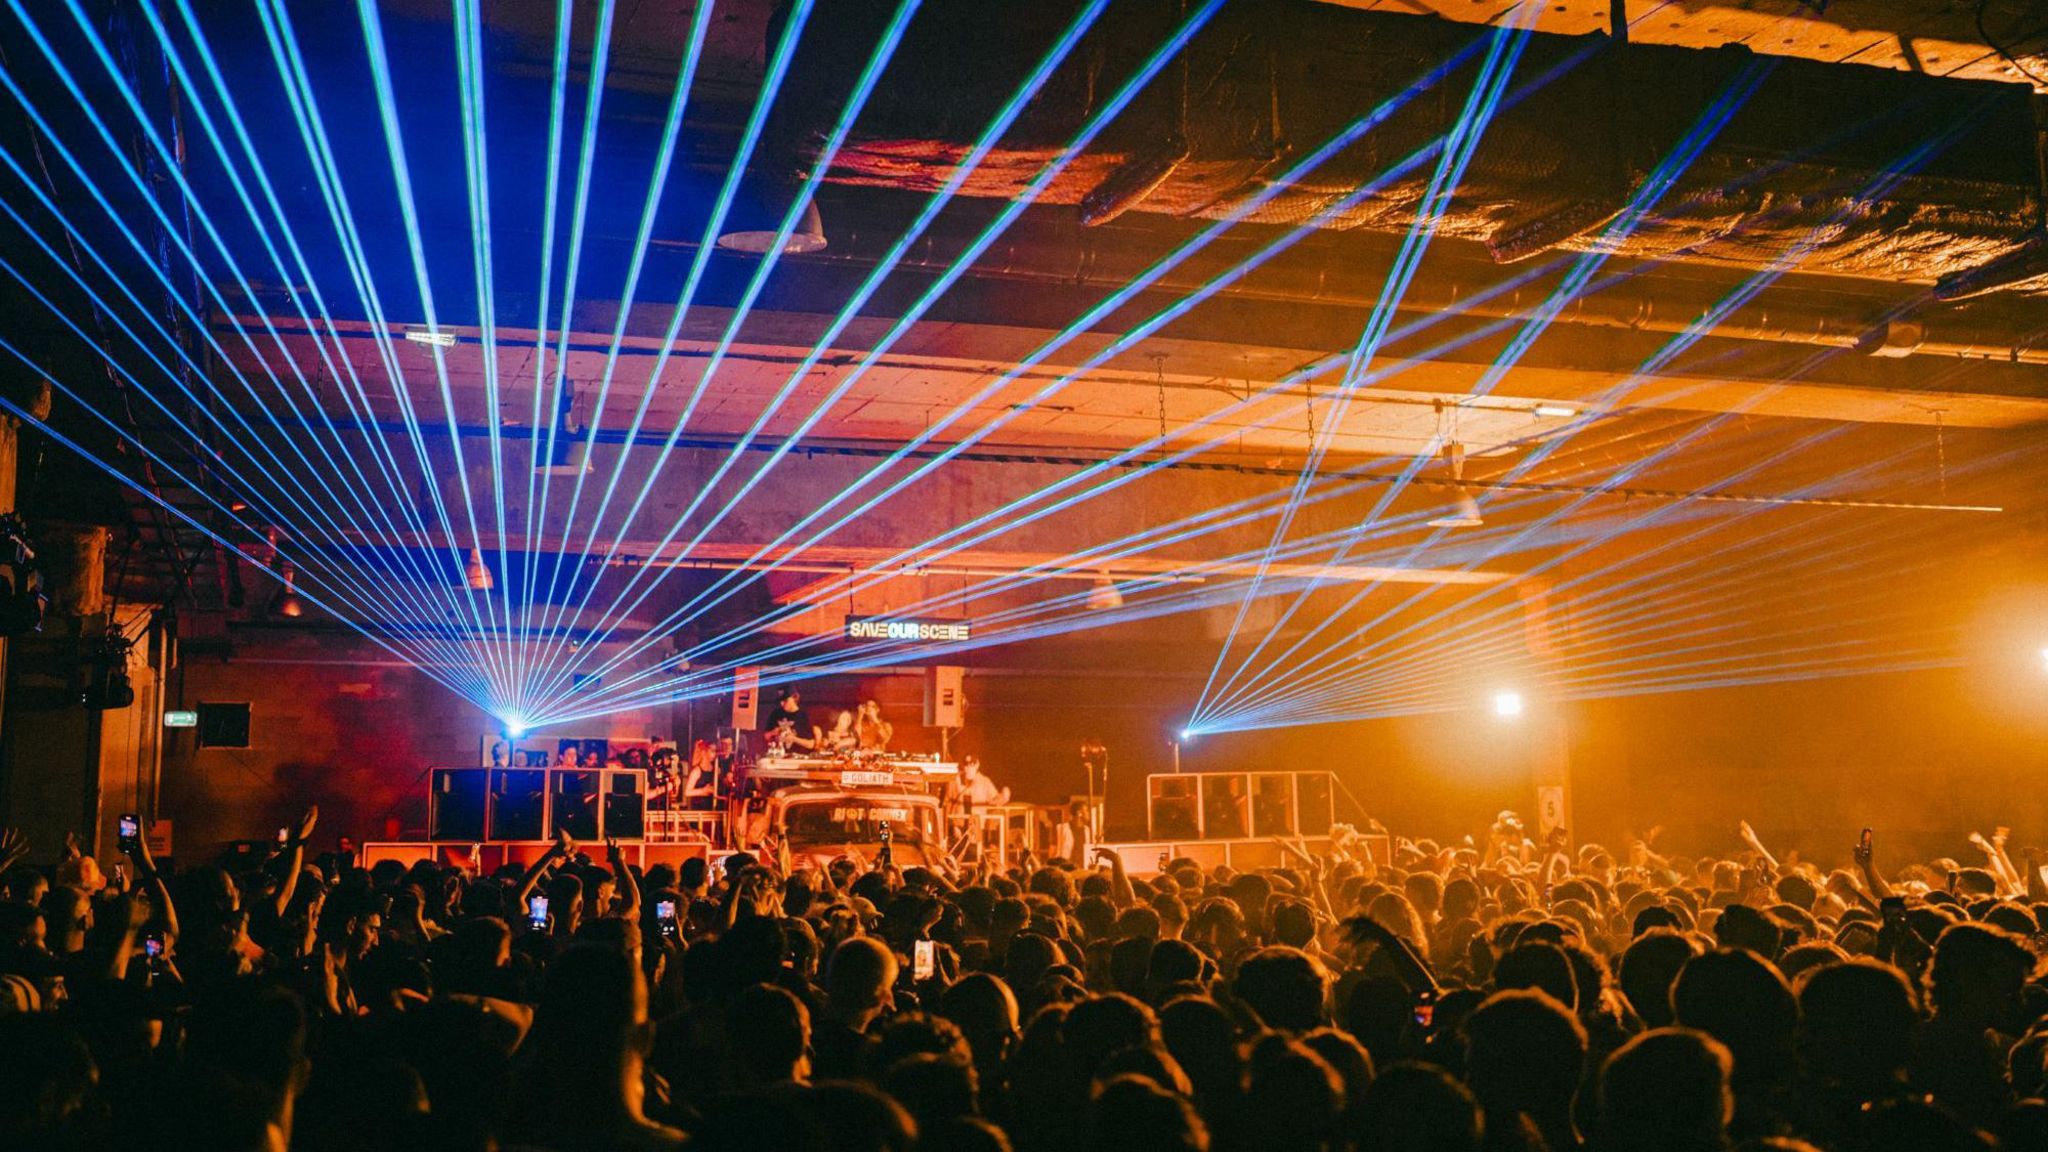 An underground rave with a lot of people in the crowd, lasers and a Save Our Scene lighbox in the backgroud